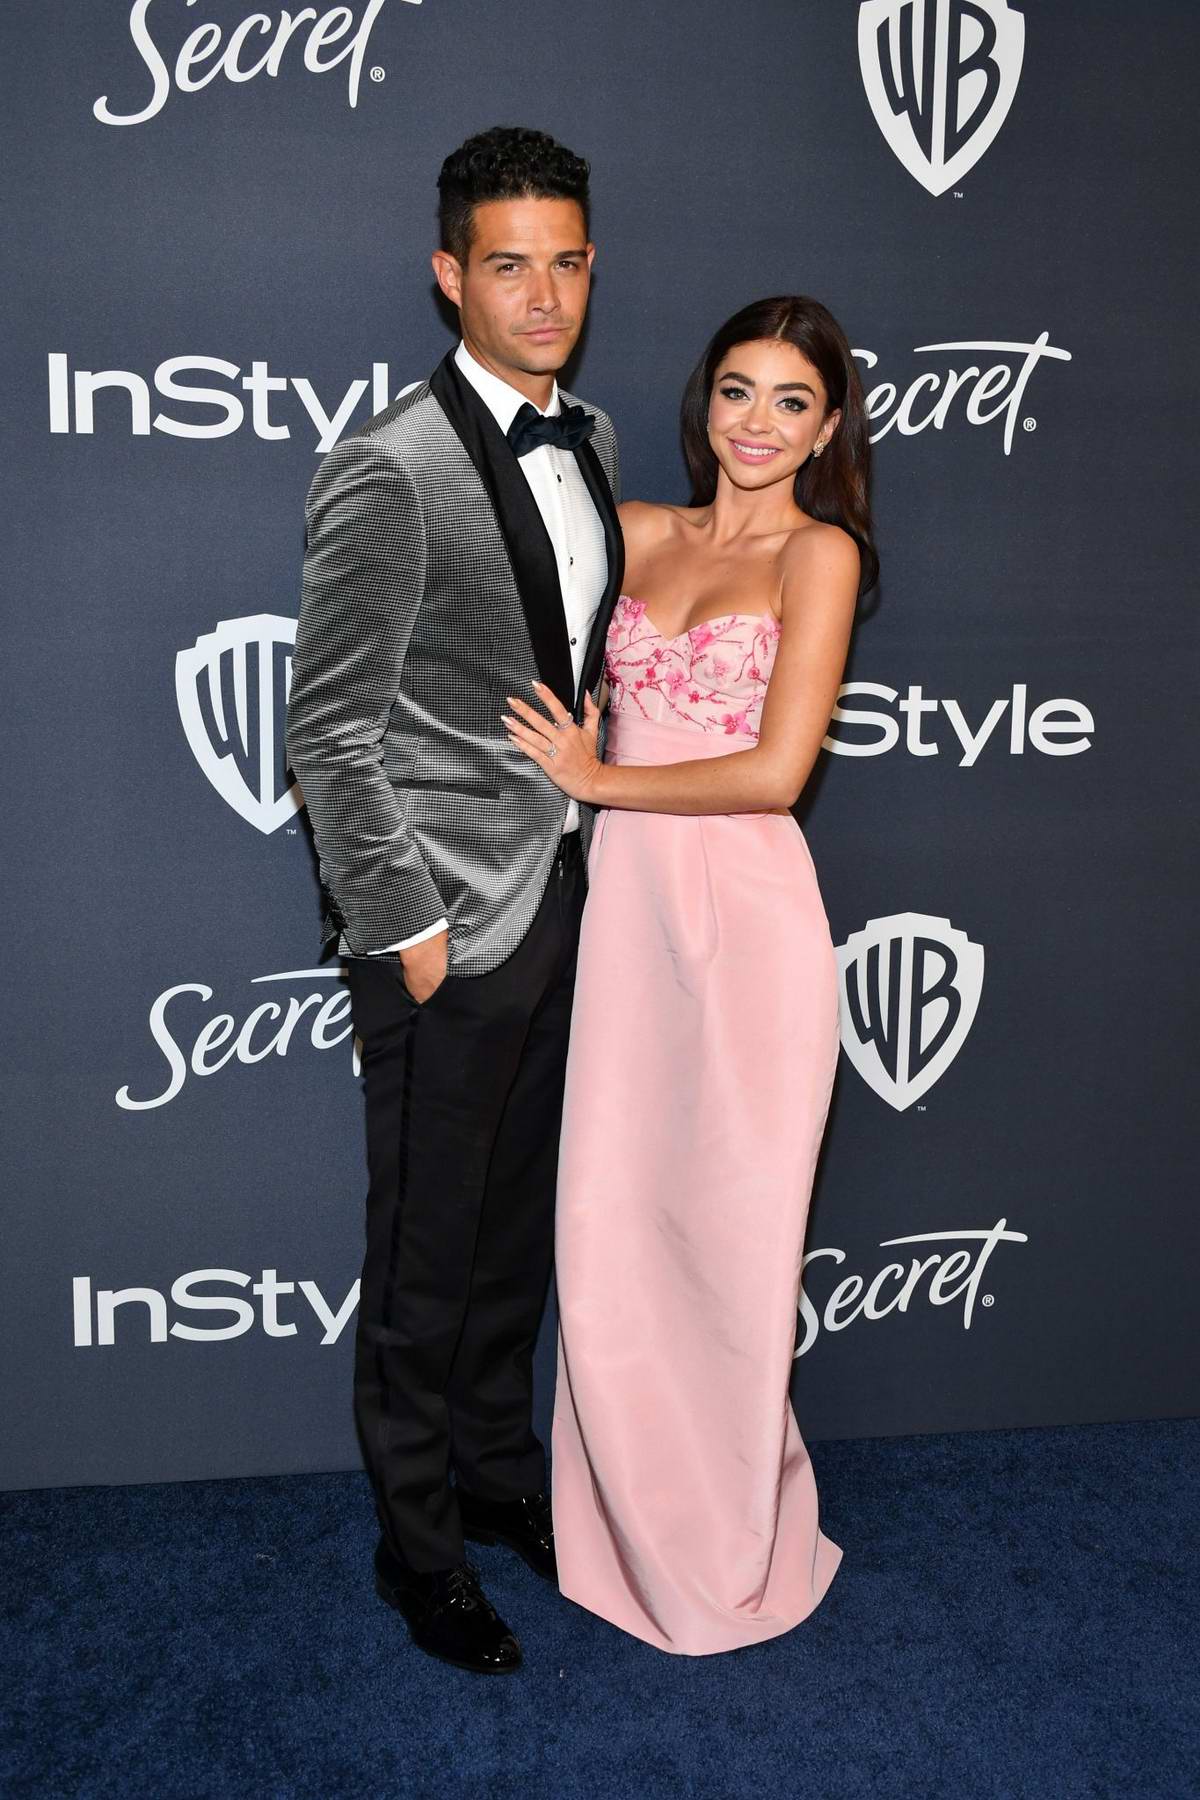 Sarah Hyland Attends The 21st Annual Warner Bros And Instyle Golden